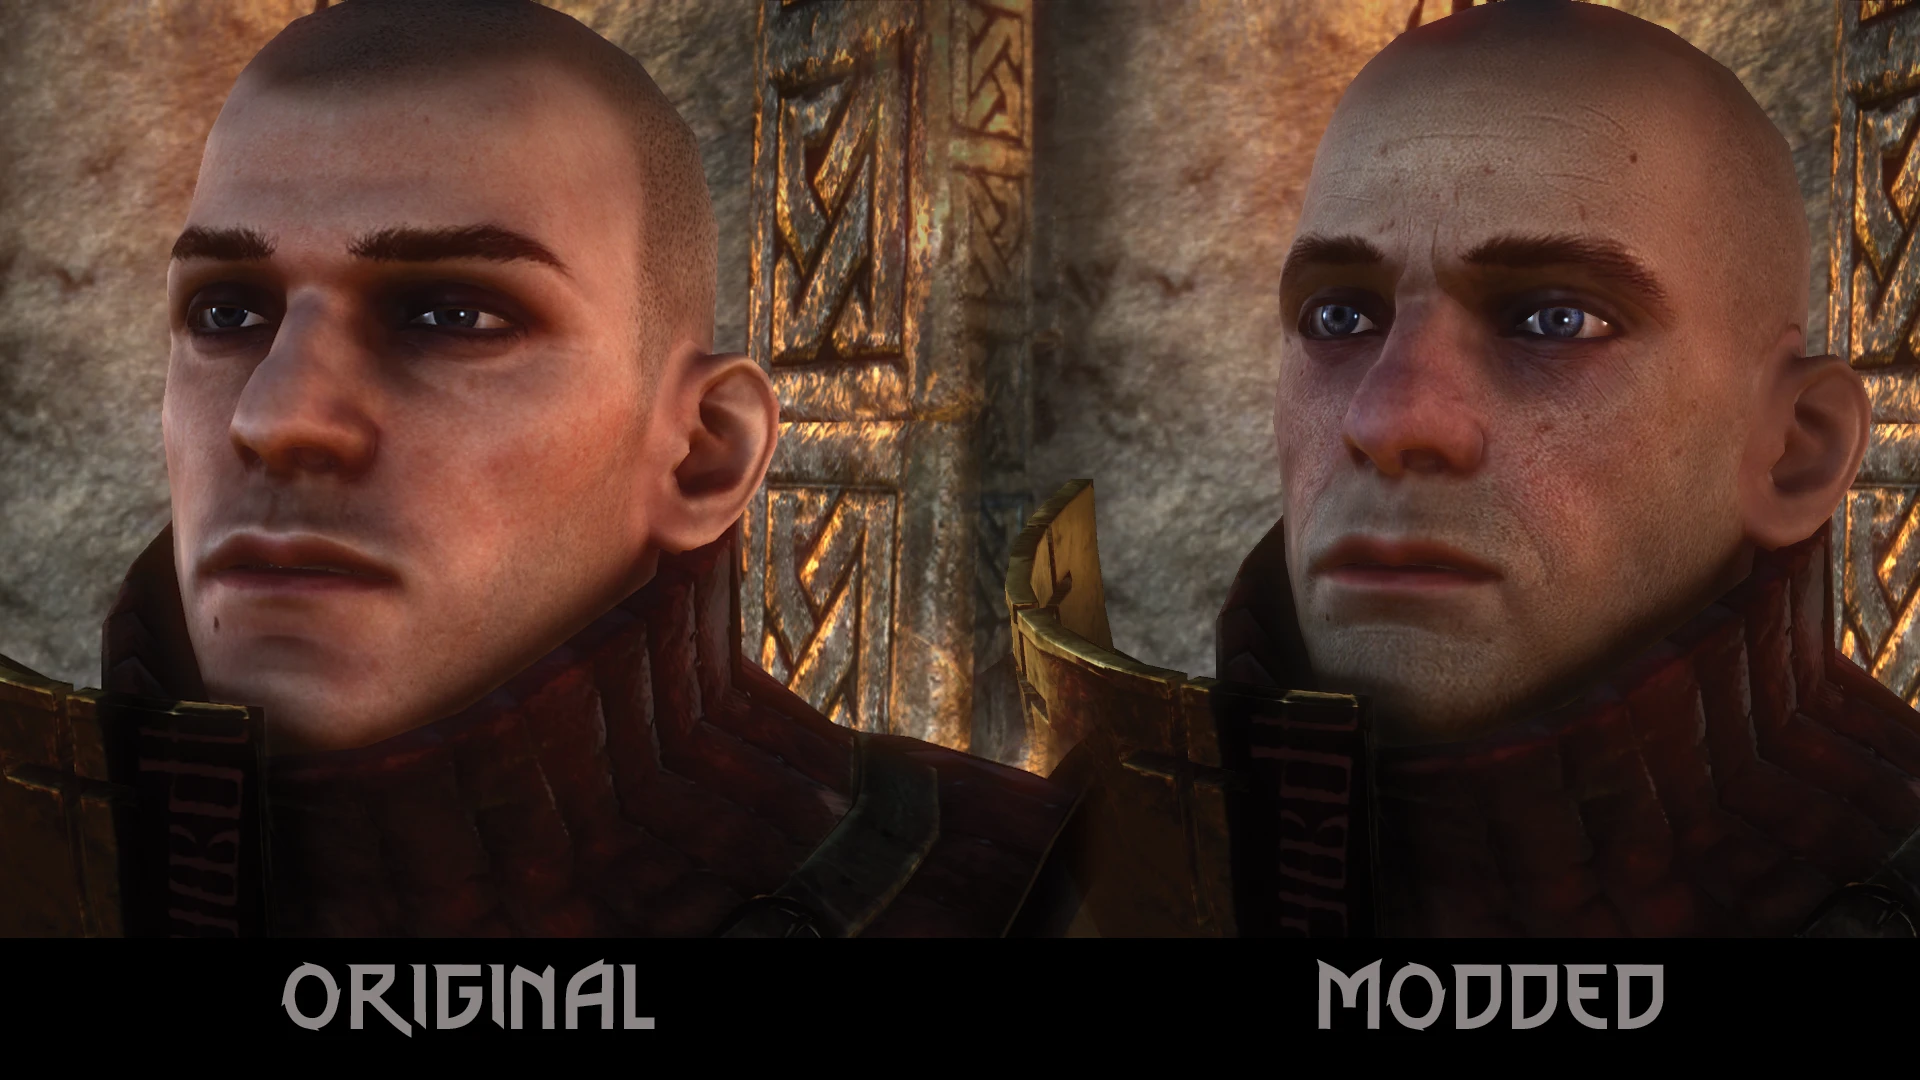 Images at The Witcher 2 Nexus - mods and community